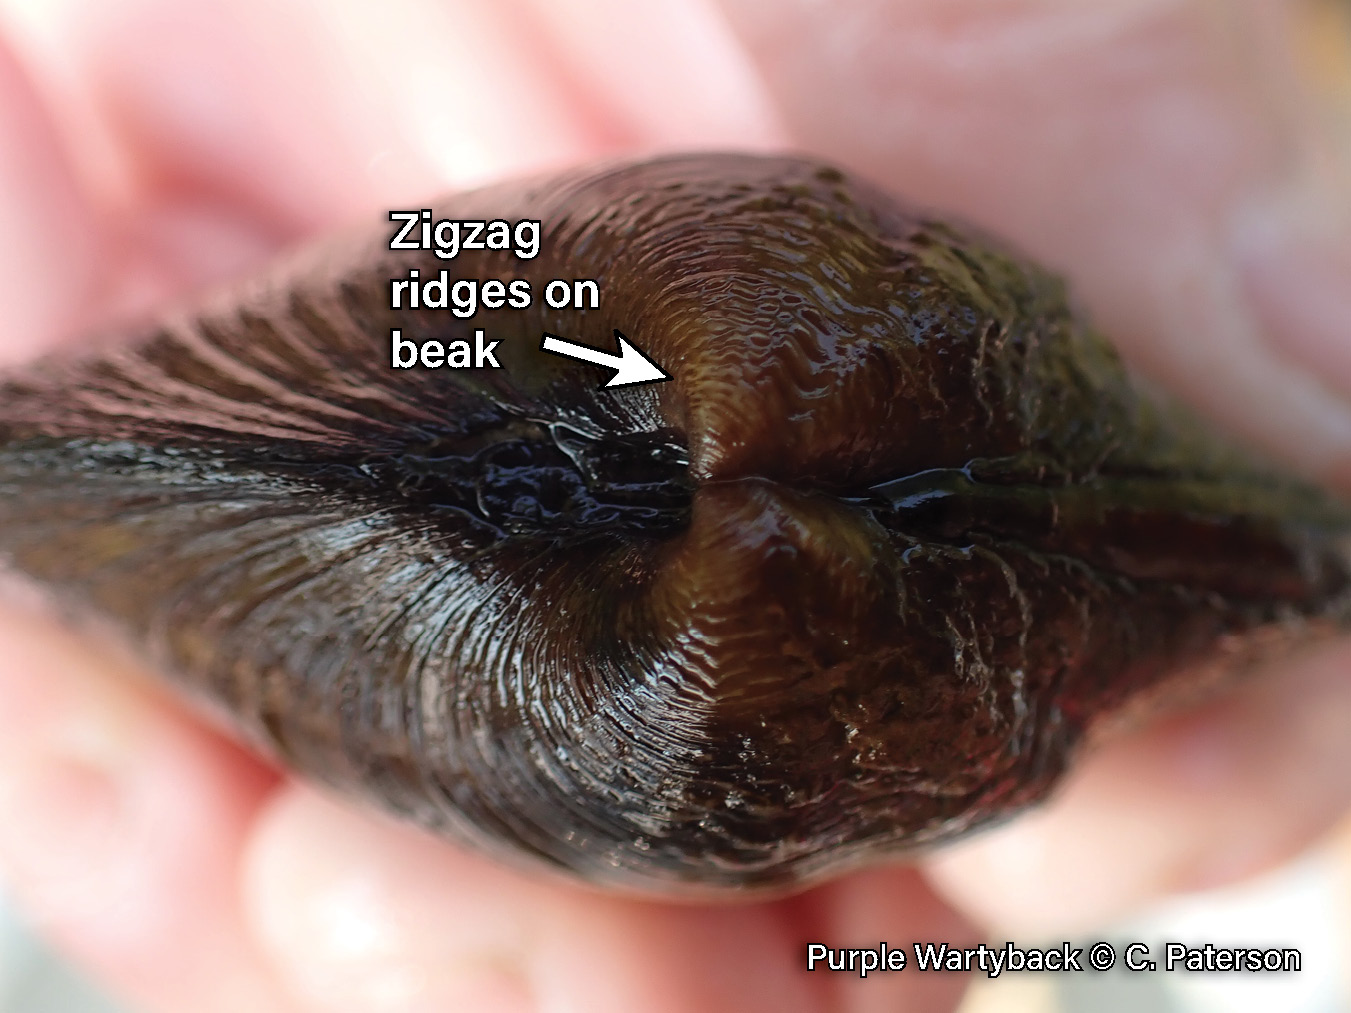 Picture of the beak structure of a purple wartyback mussel in a hand, a rich reddish-brown, medium-sized mussel that is covered in bumps. Its beak is covered in a series of fine zigzag ridges.